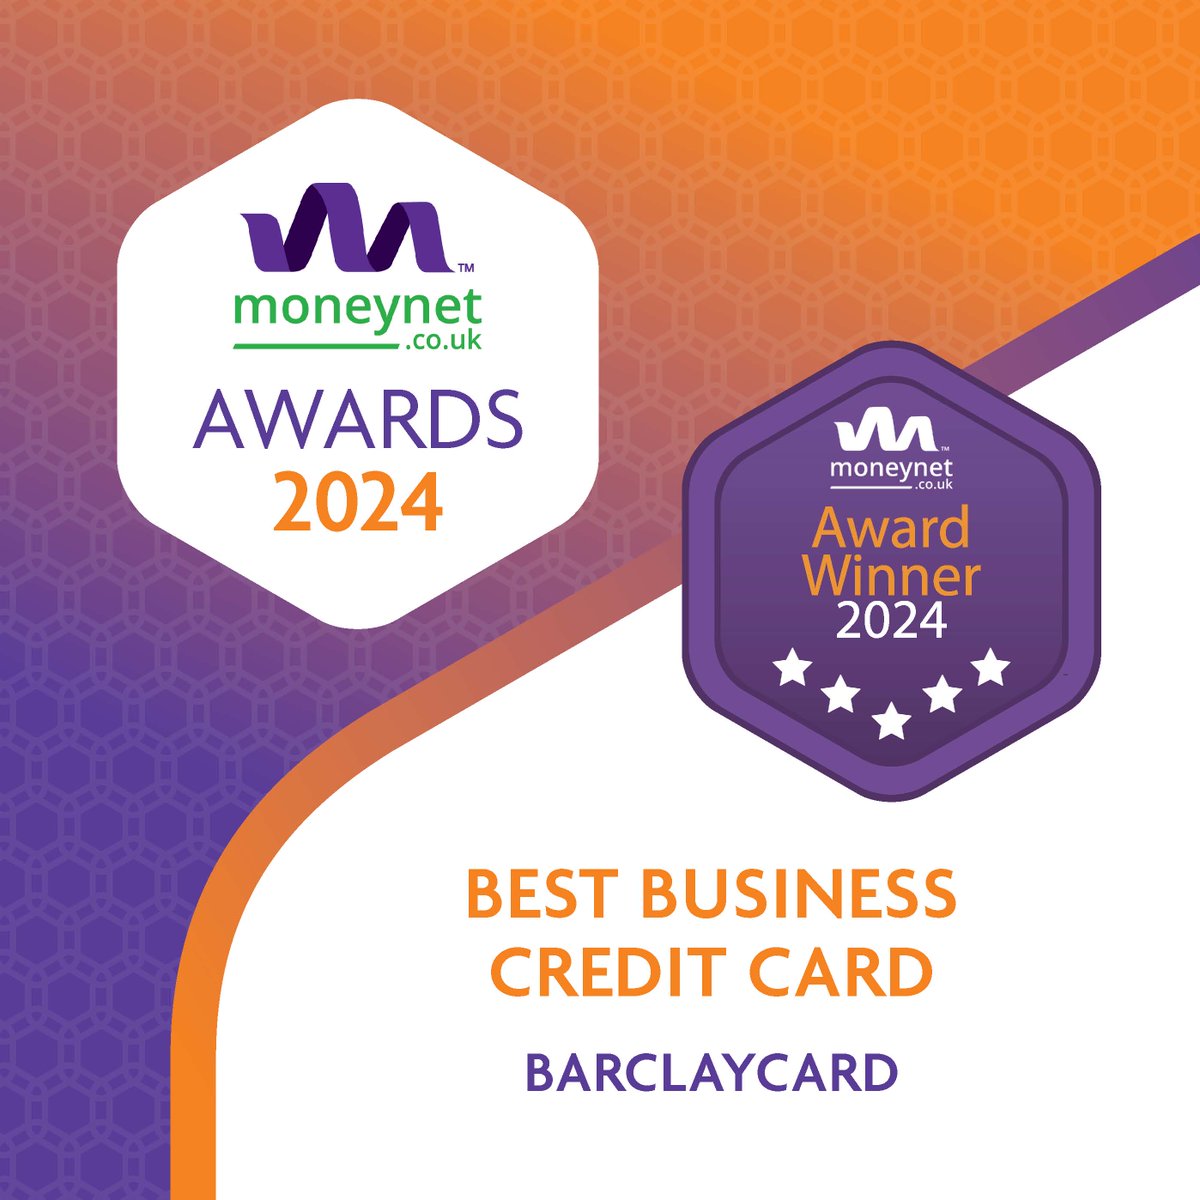 Congratulations to @Barclaycard for winning Best Business Credit Card in the 2024 Moneynet Awards #MoneynetAwards24